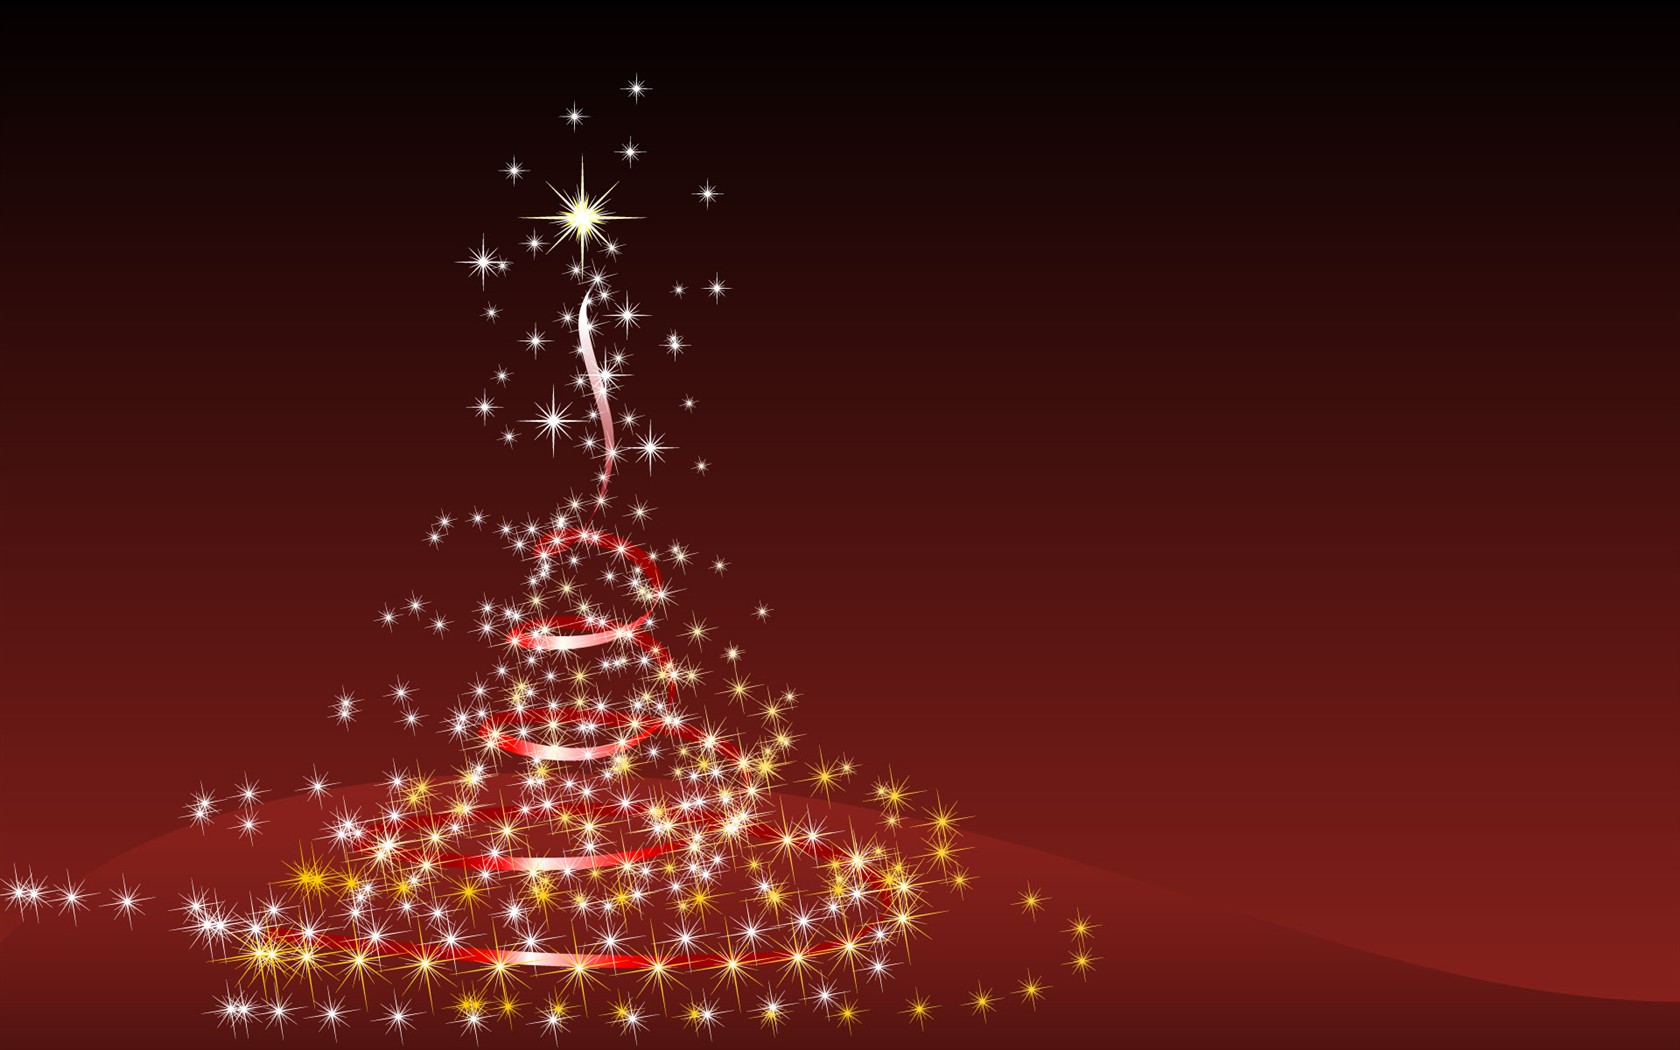 Exquisite Christmas Theme HD Wallpapers #4 - 1680x1050